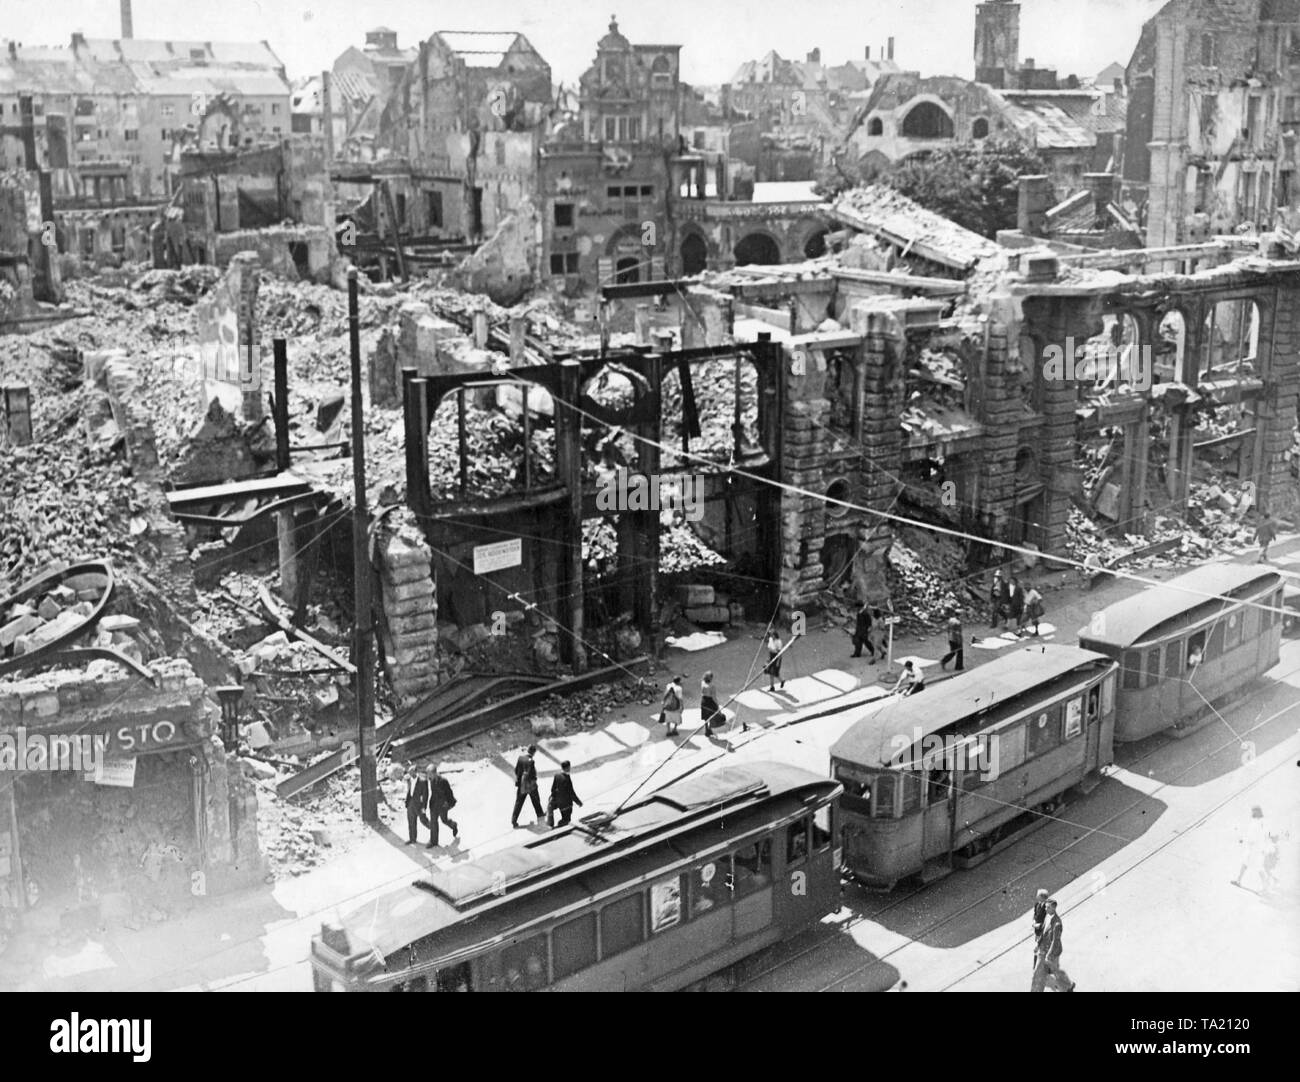 Ruins and debris in the Bayerstrasse after the Second World War, 1945 Stock Photo